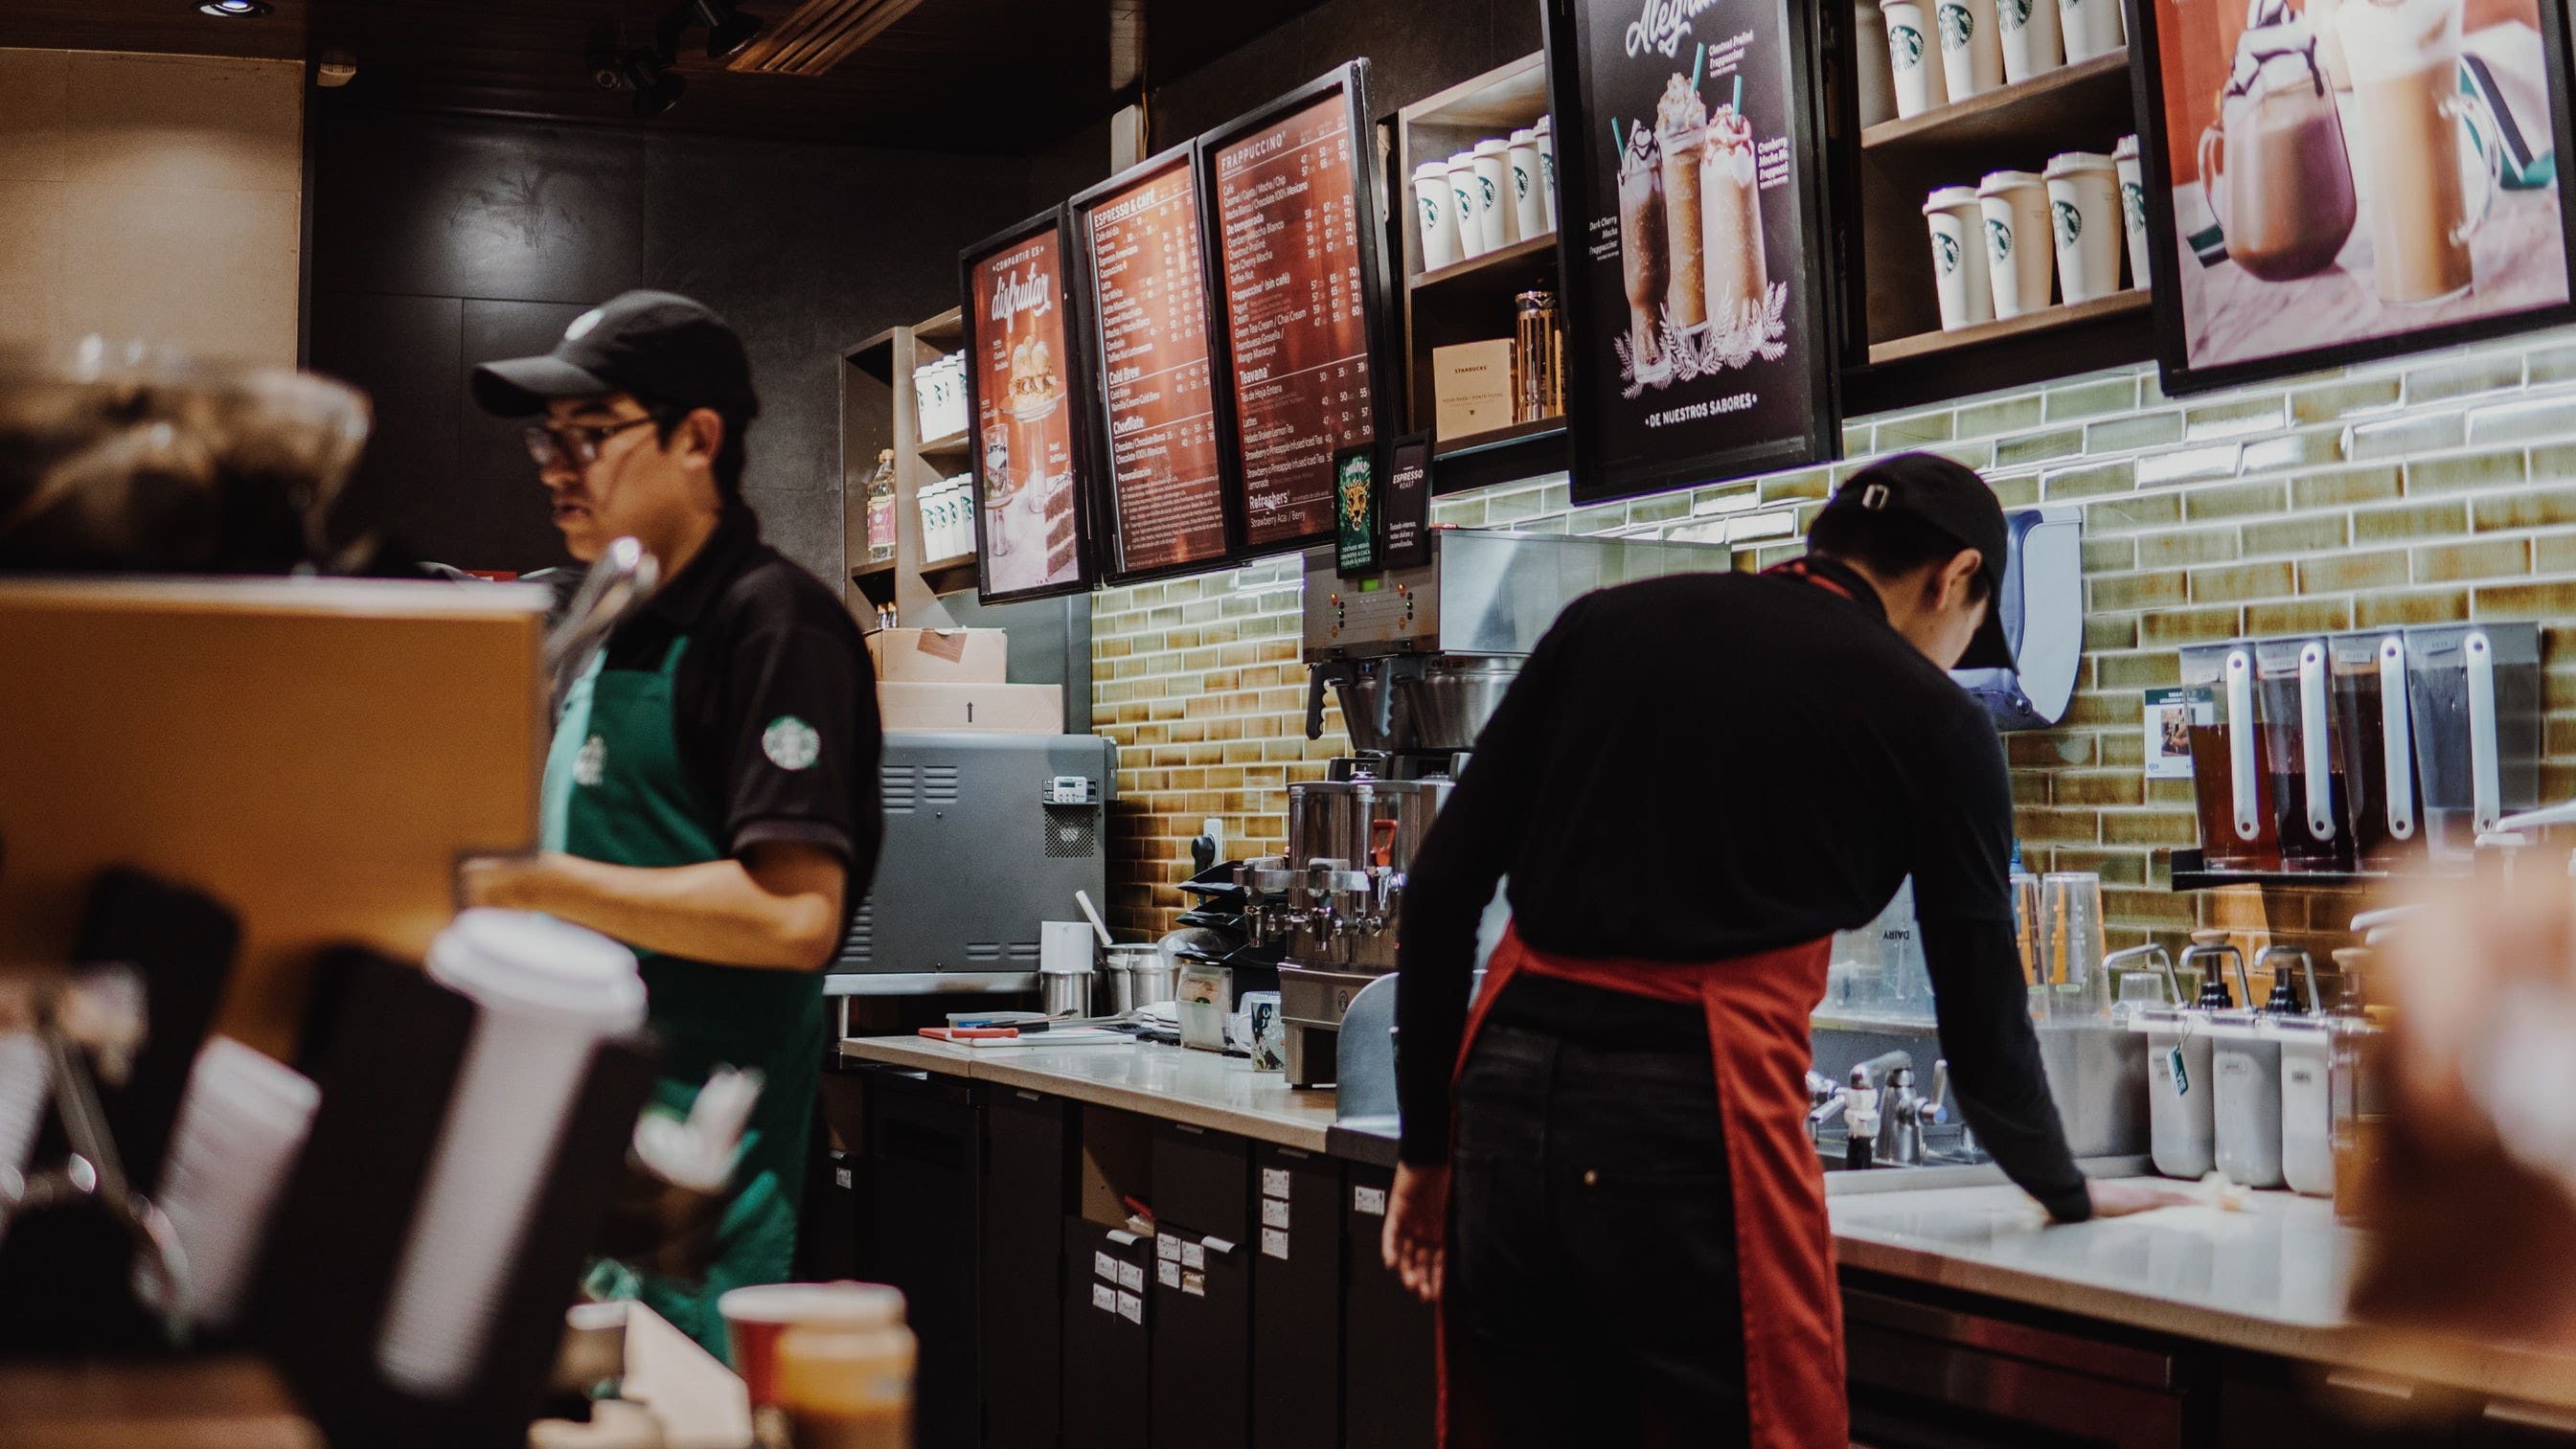 Starbucks Partners With Sequoia To Make 'Strategic Co-Investments' In China